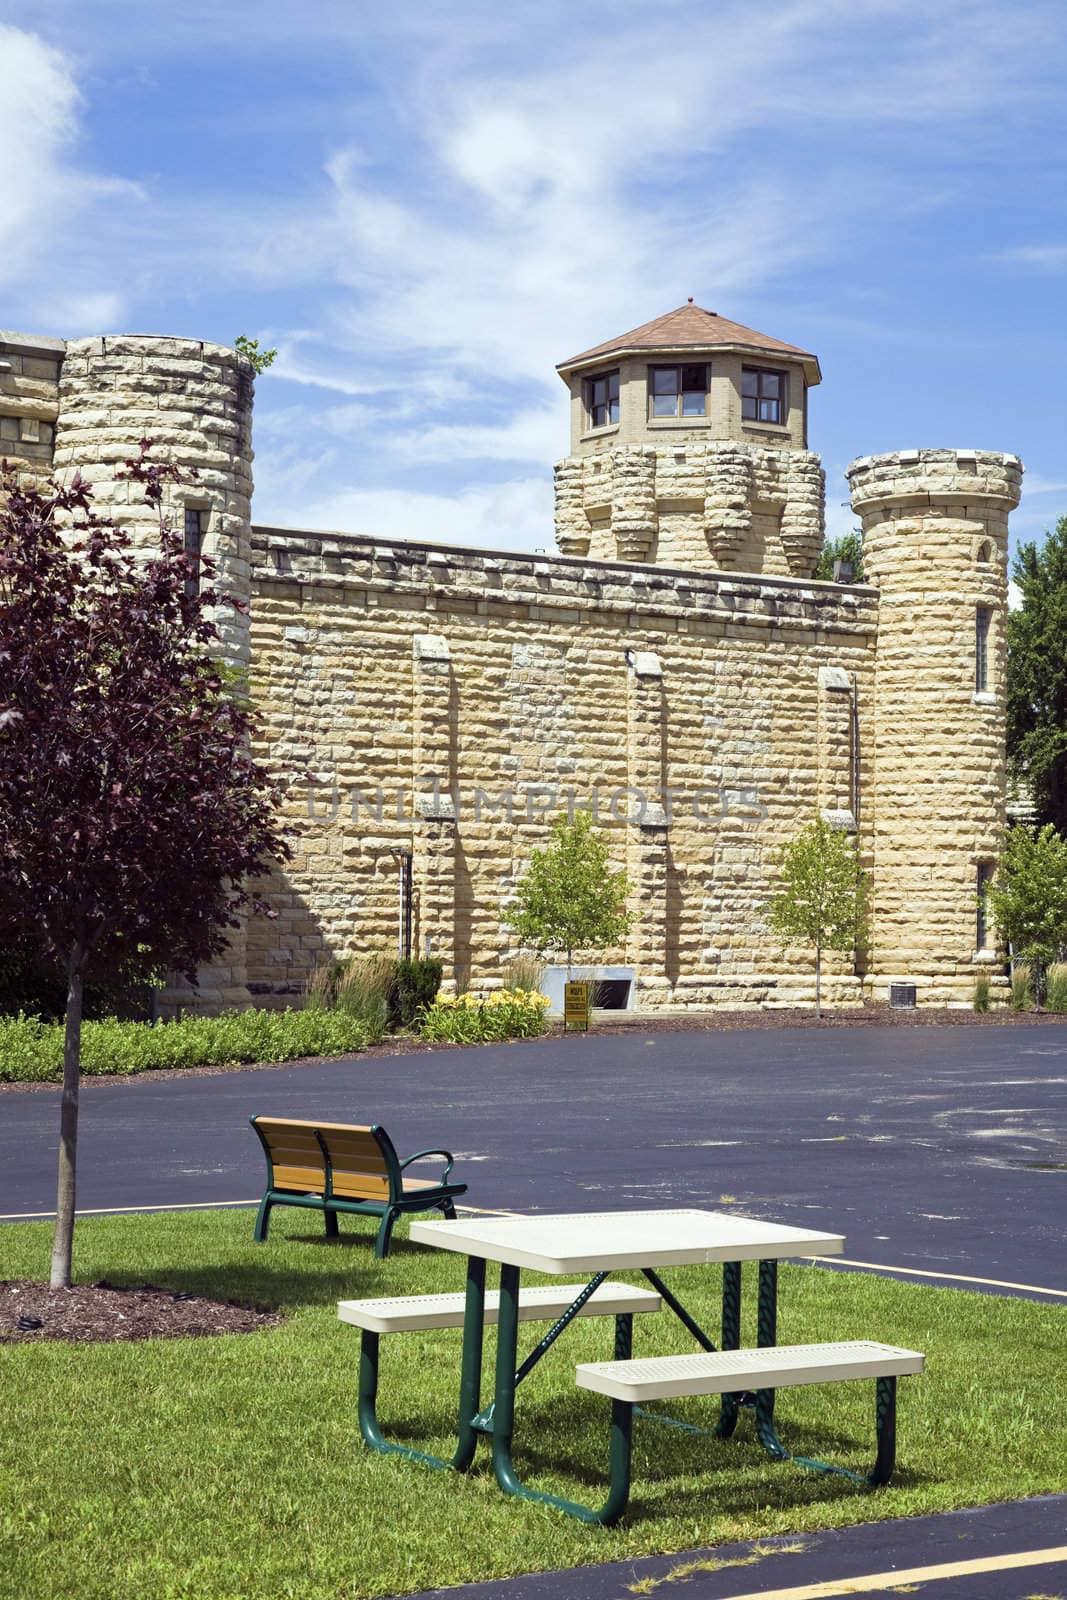 Benches in front of Historic Jail in Joliet, Illinois - suburb of Chicago.